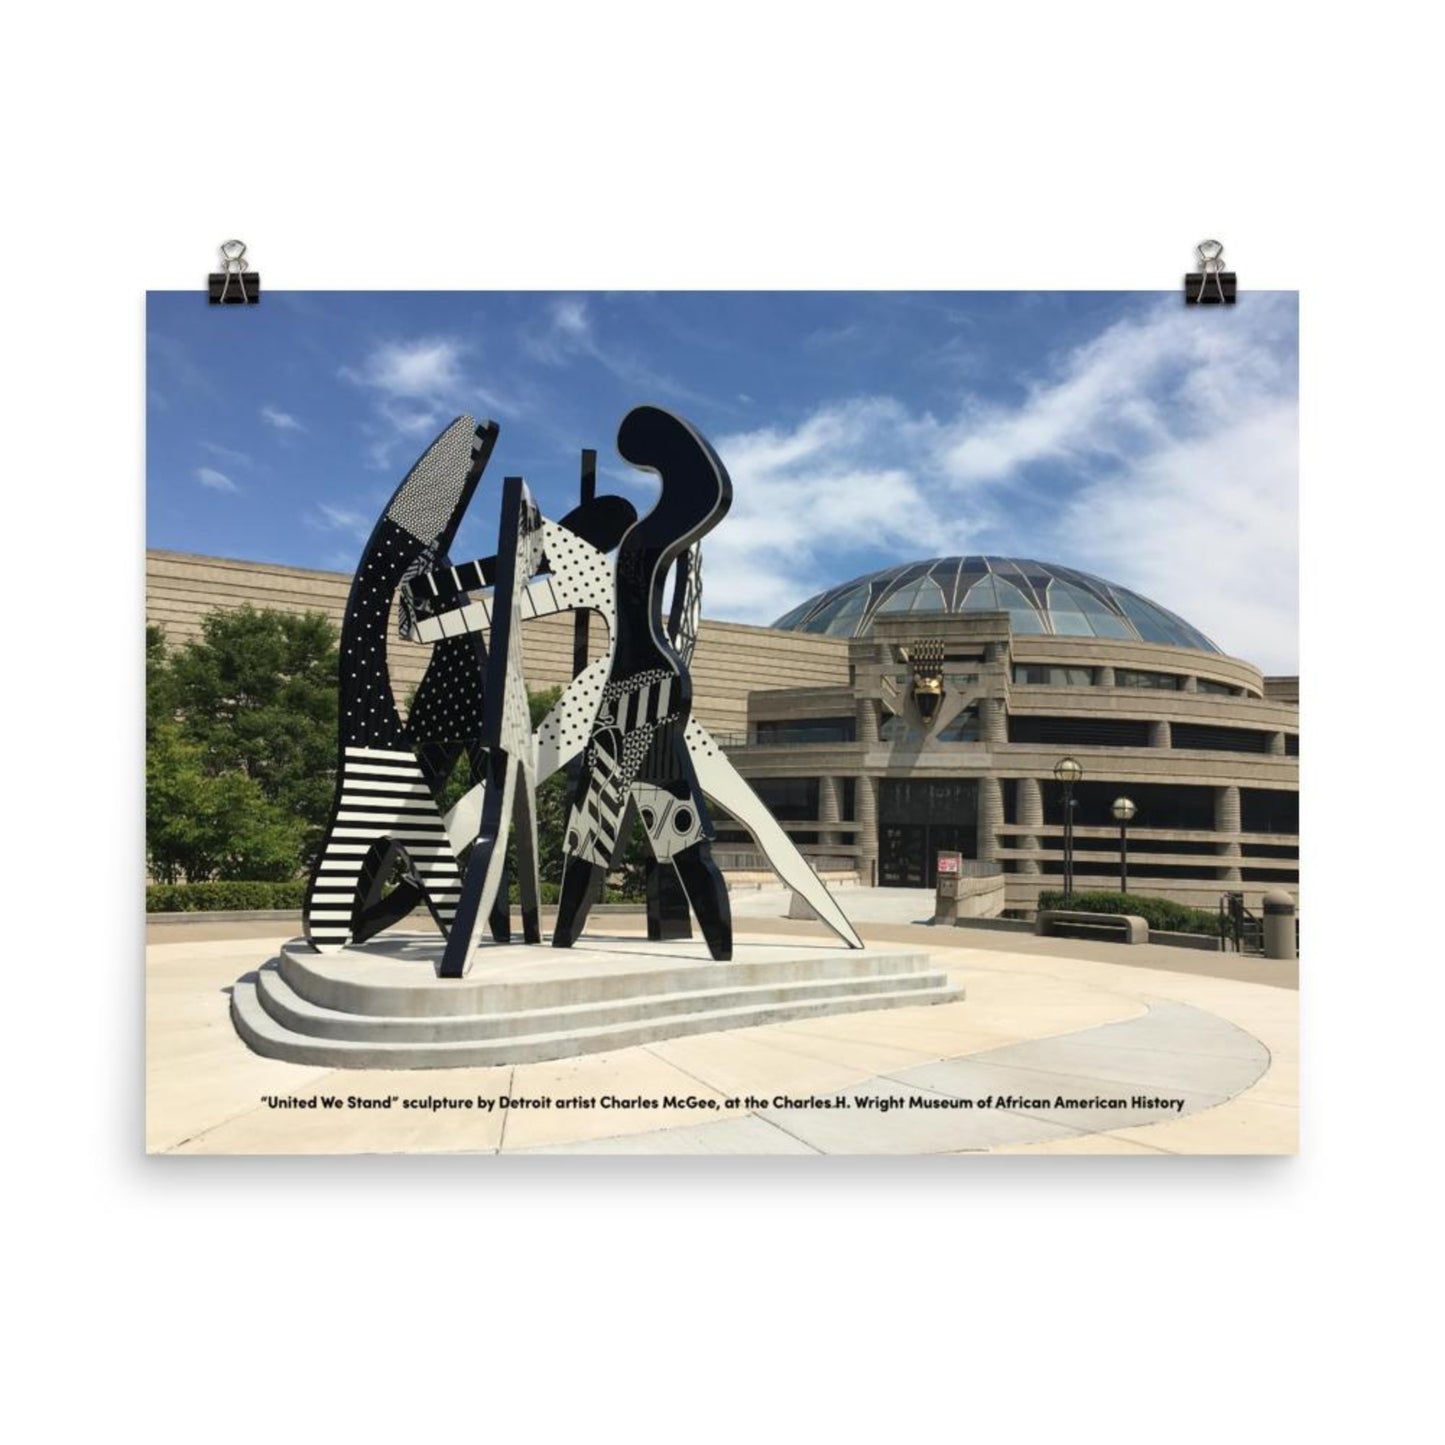 24 inch by 36 inch poster with United We Stand sculpture in front of Charles H. Wright Museum of African American History